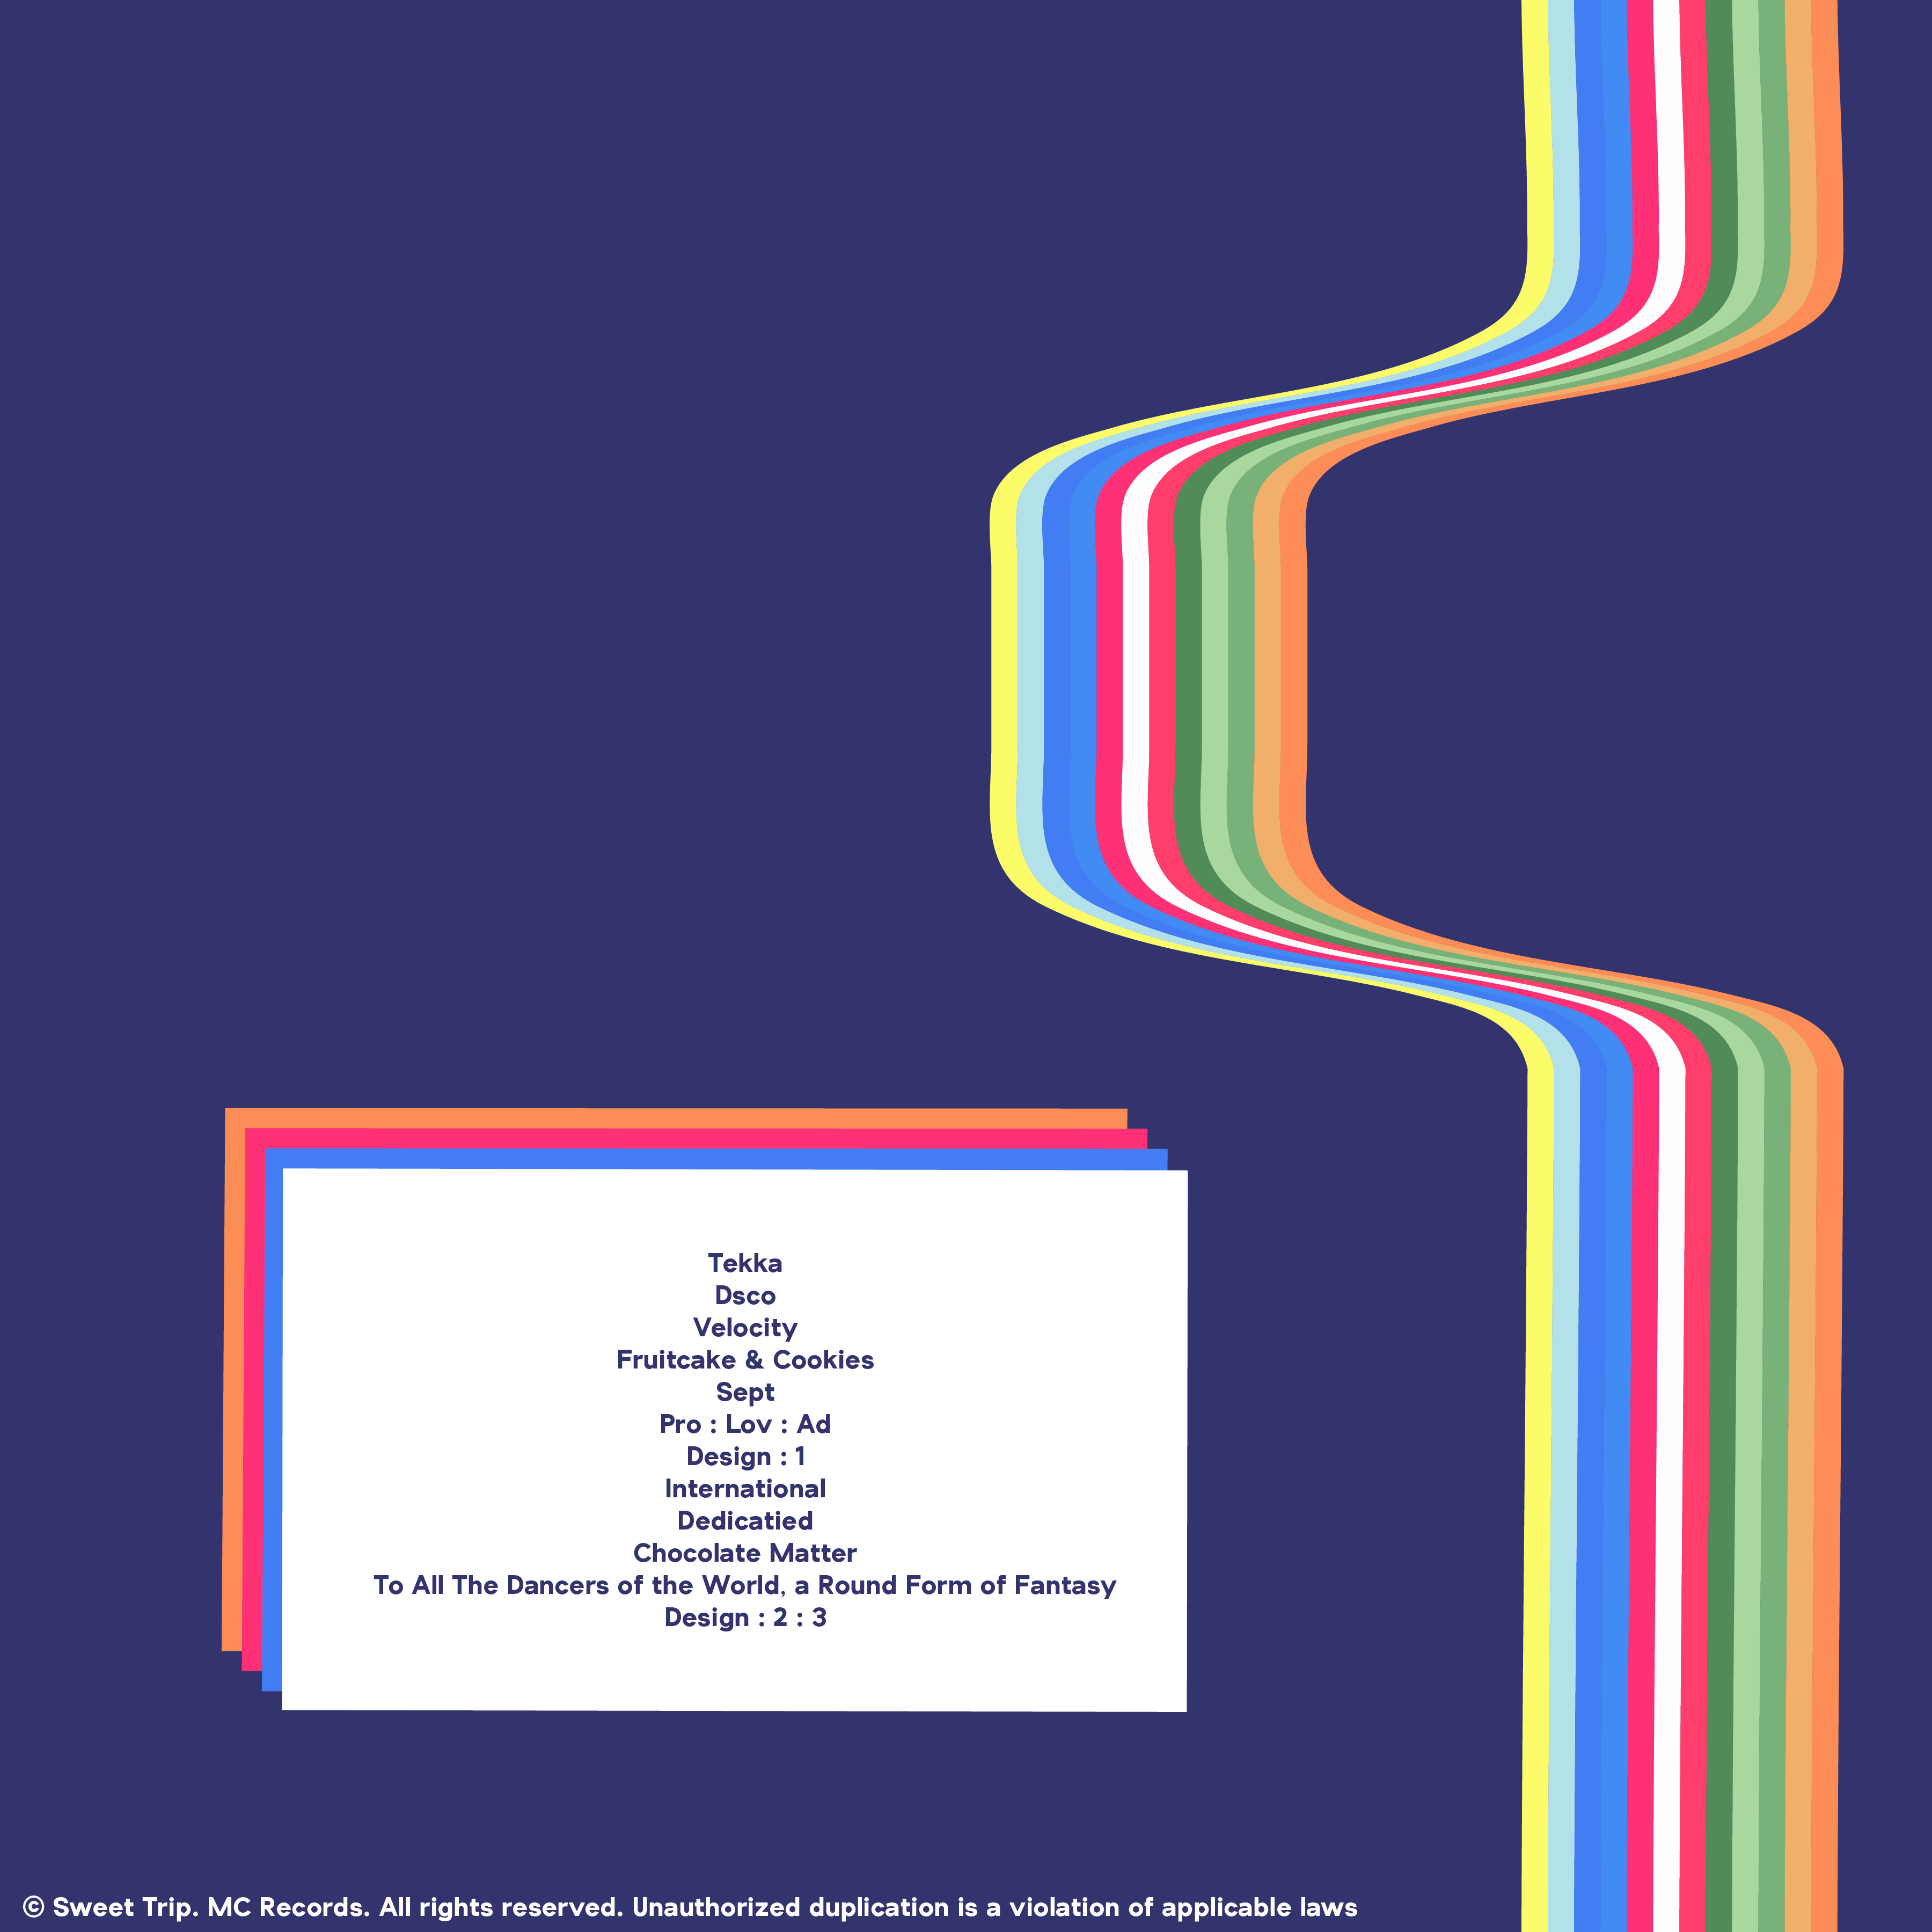 The finished back cover of the album. It has a navy background with a wavy ribbon of the same colors from the front. Near the bottom right of the cover is a white box with the track listing.